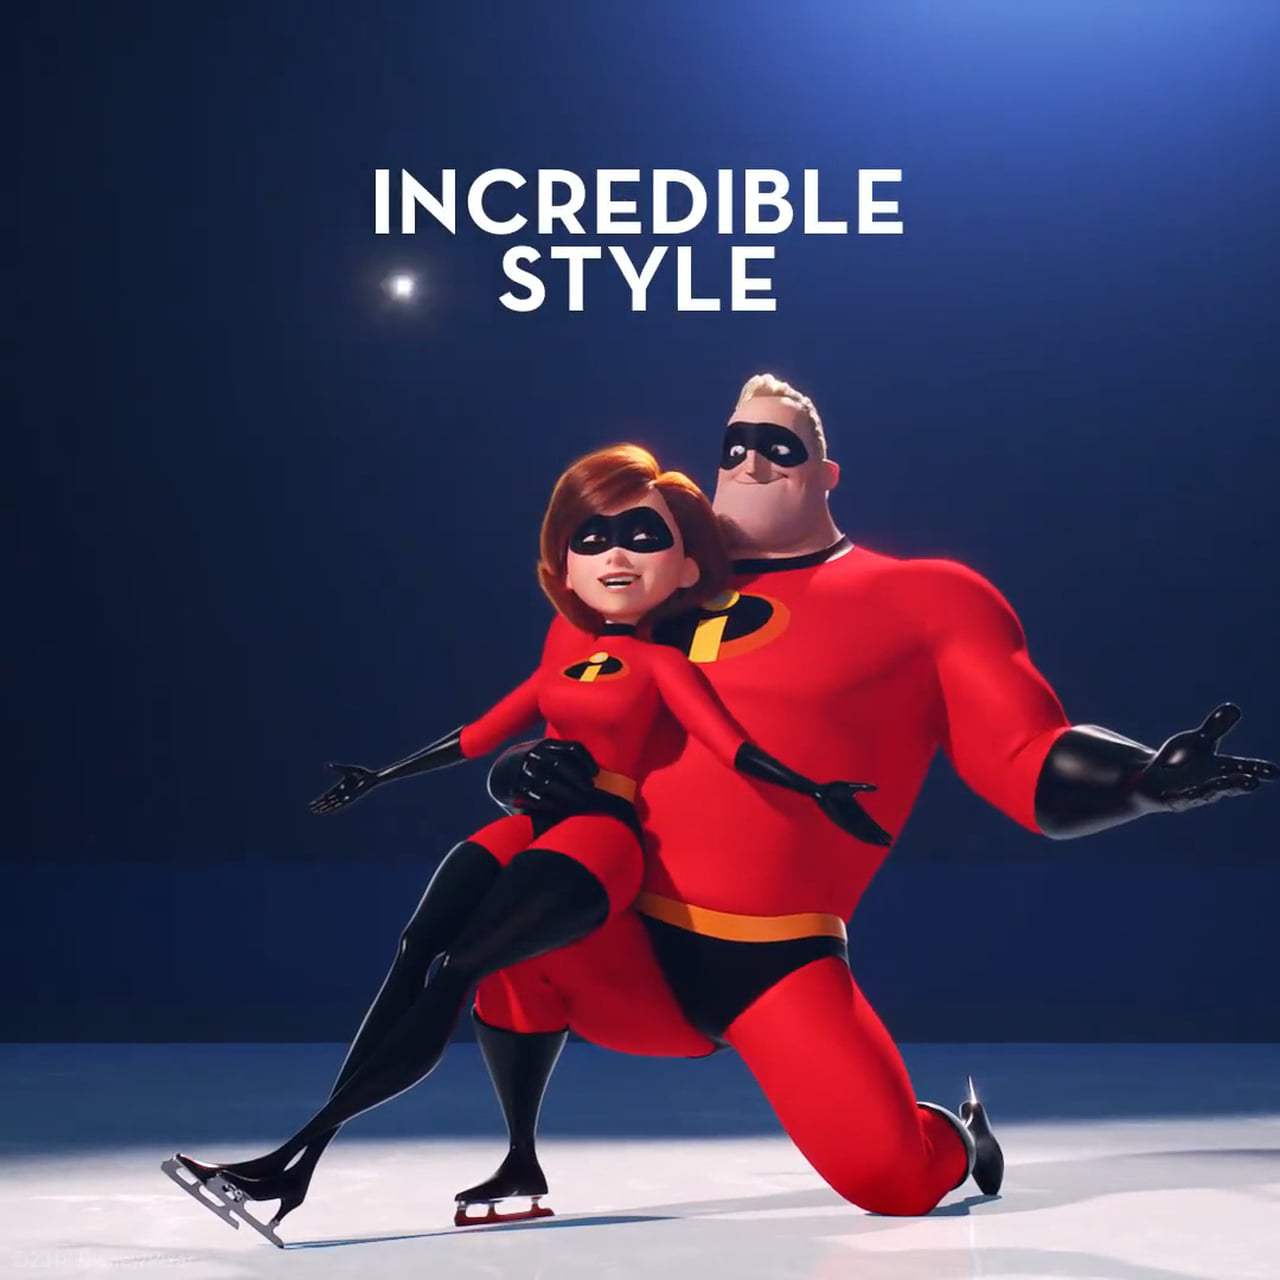 The Incredibles 2 TV Spot - Incredible Style (2018)